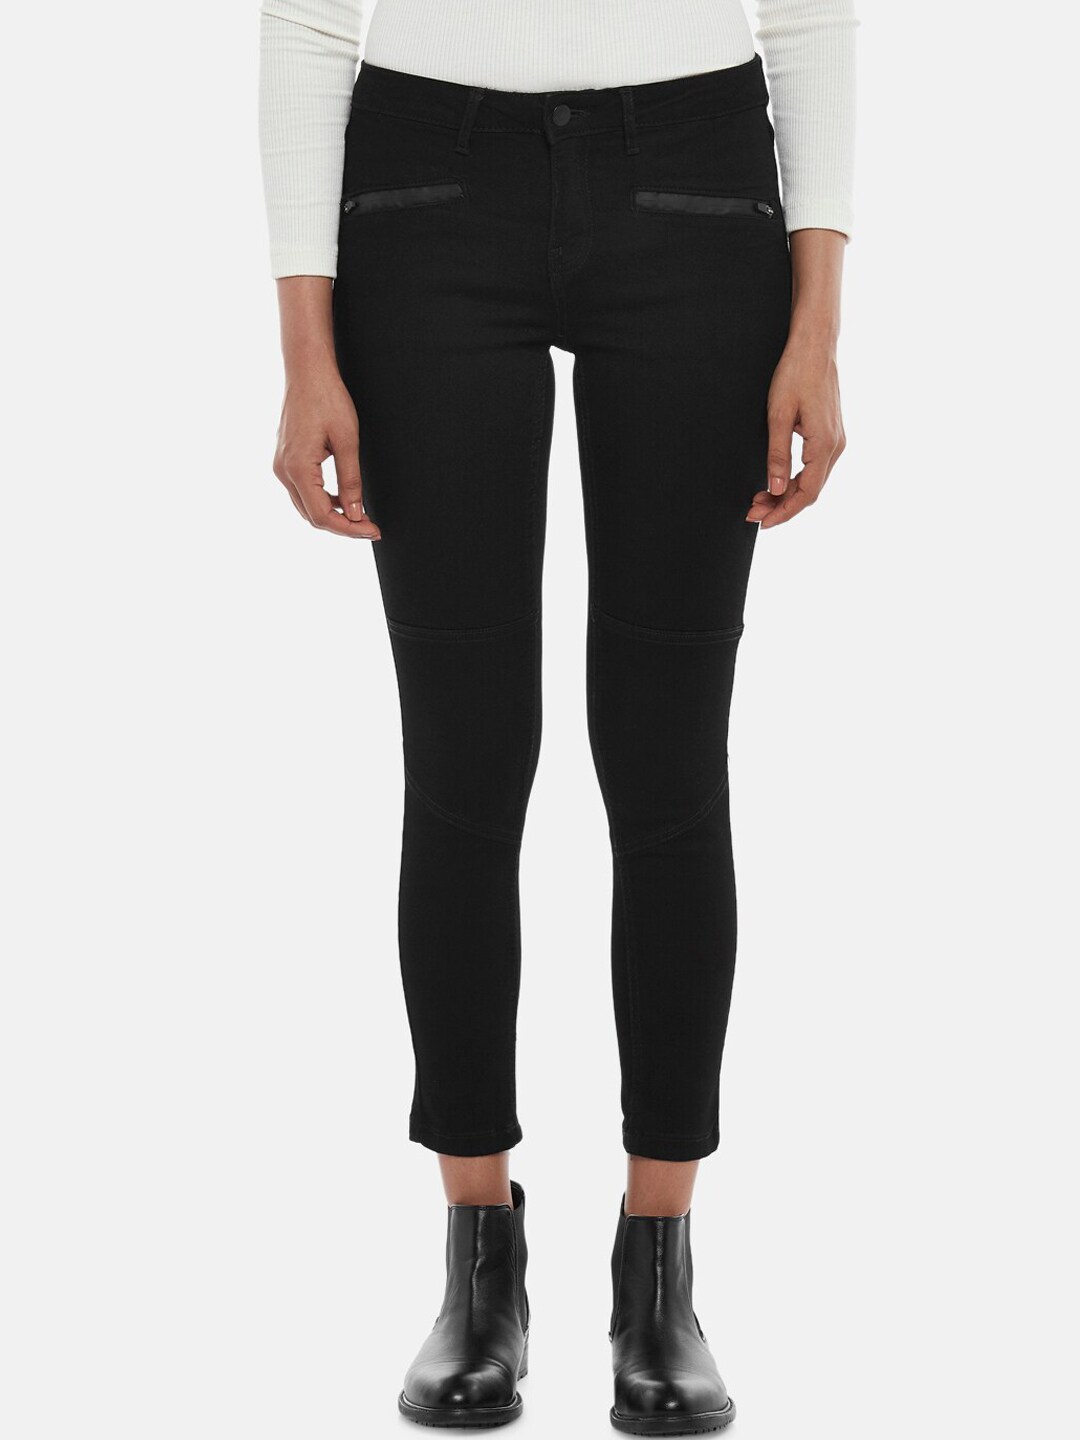 SF JEANS by Pantaloons Women Black Skinny Fit Jeans Price in India